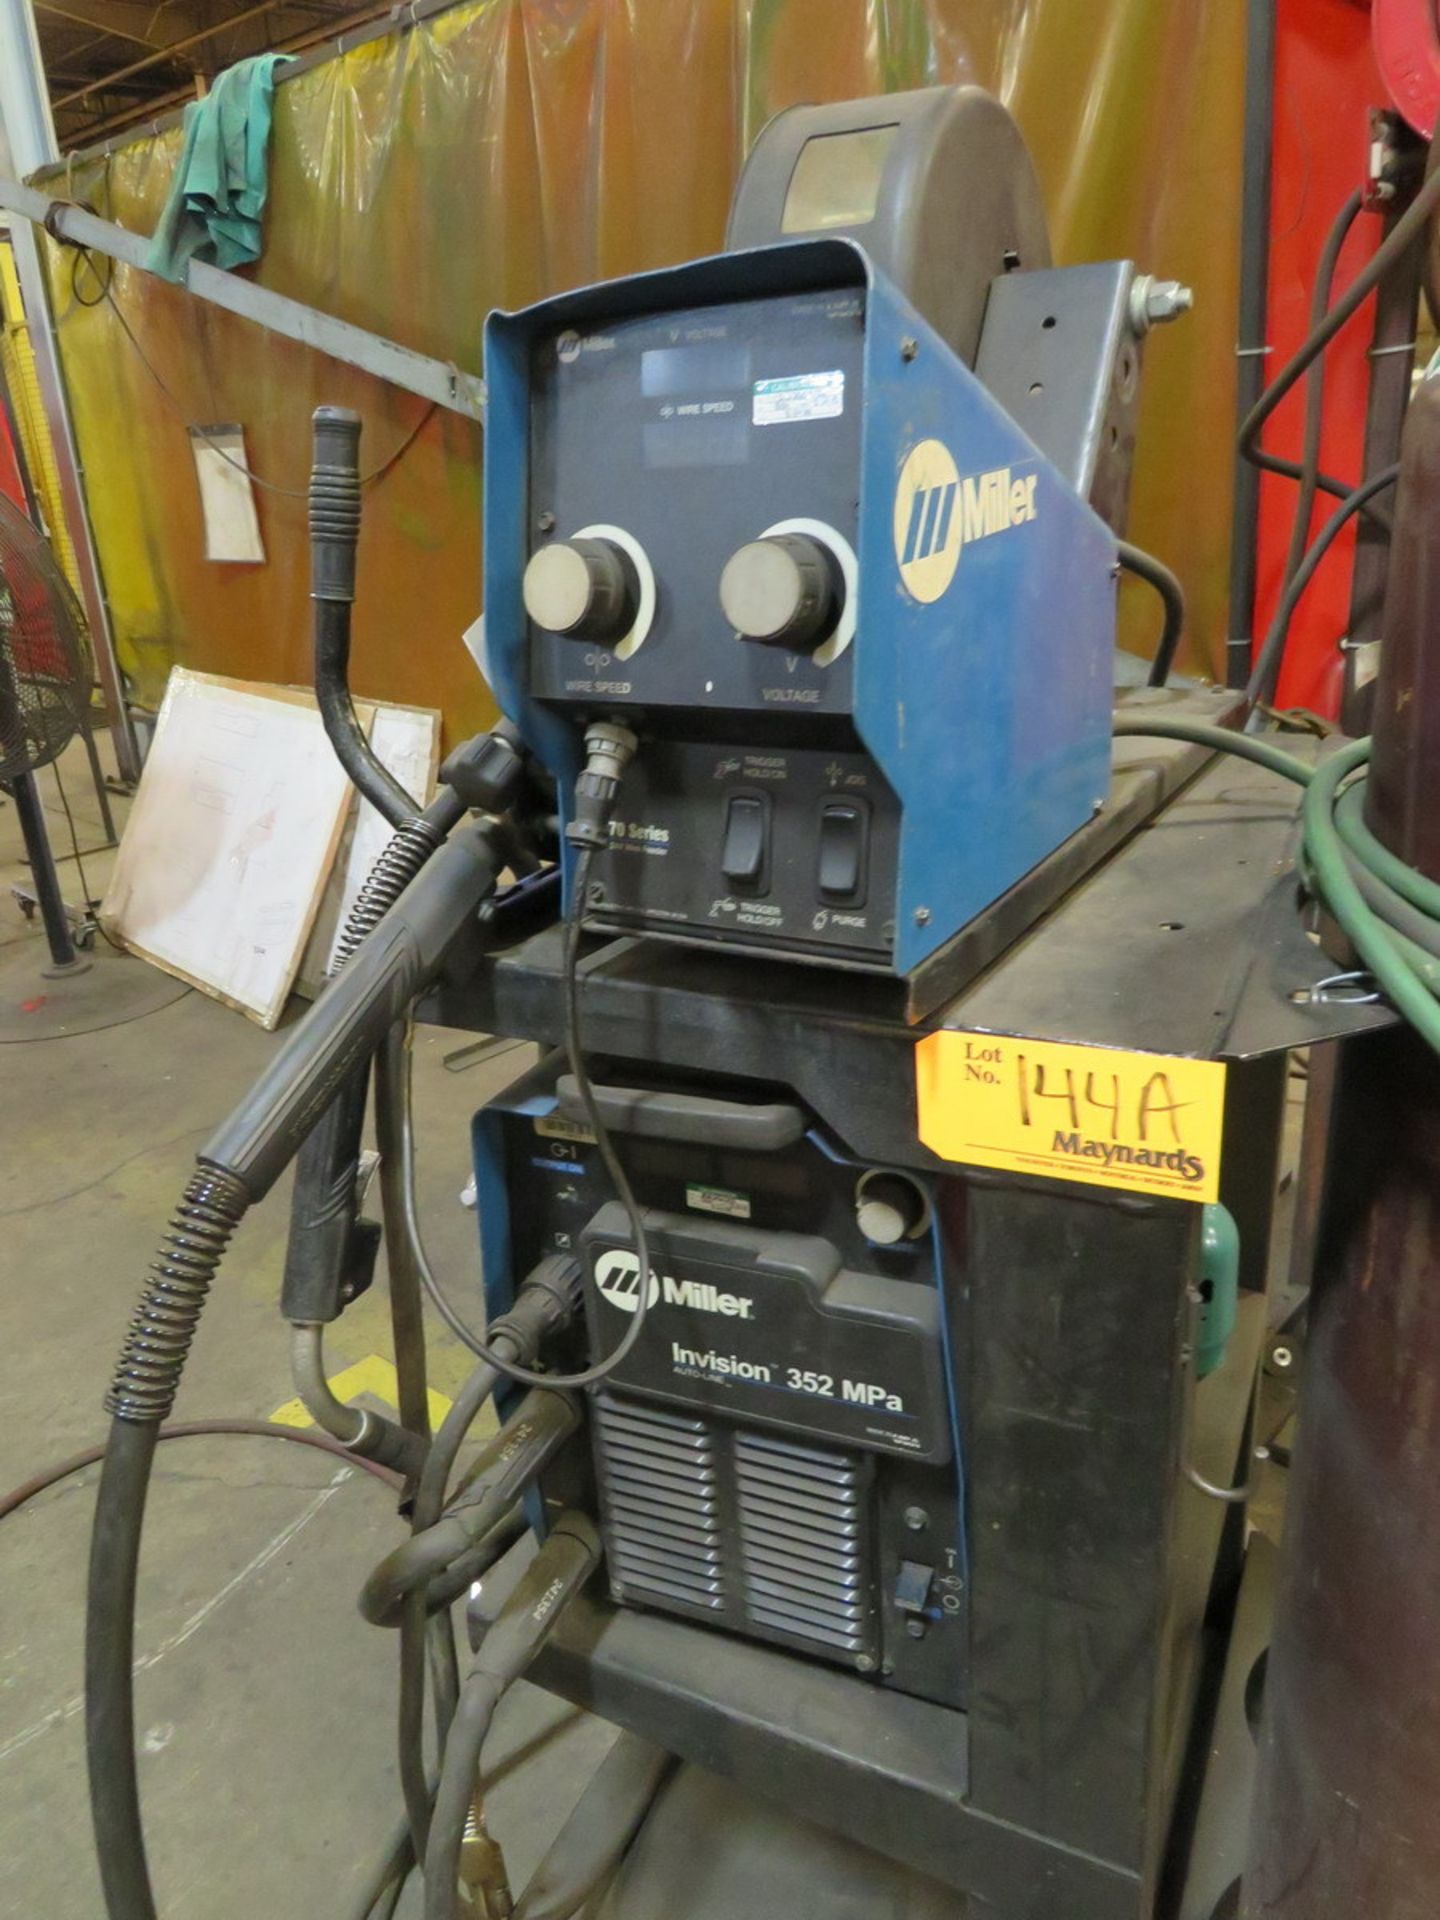 2010 Miller Invision 352MPa Welding Power Source - Image 2 of 6